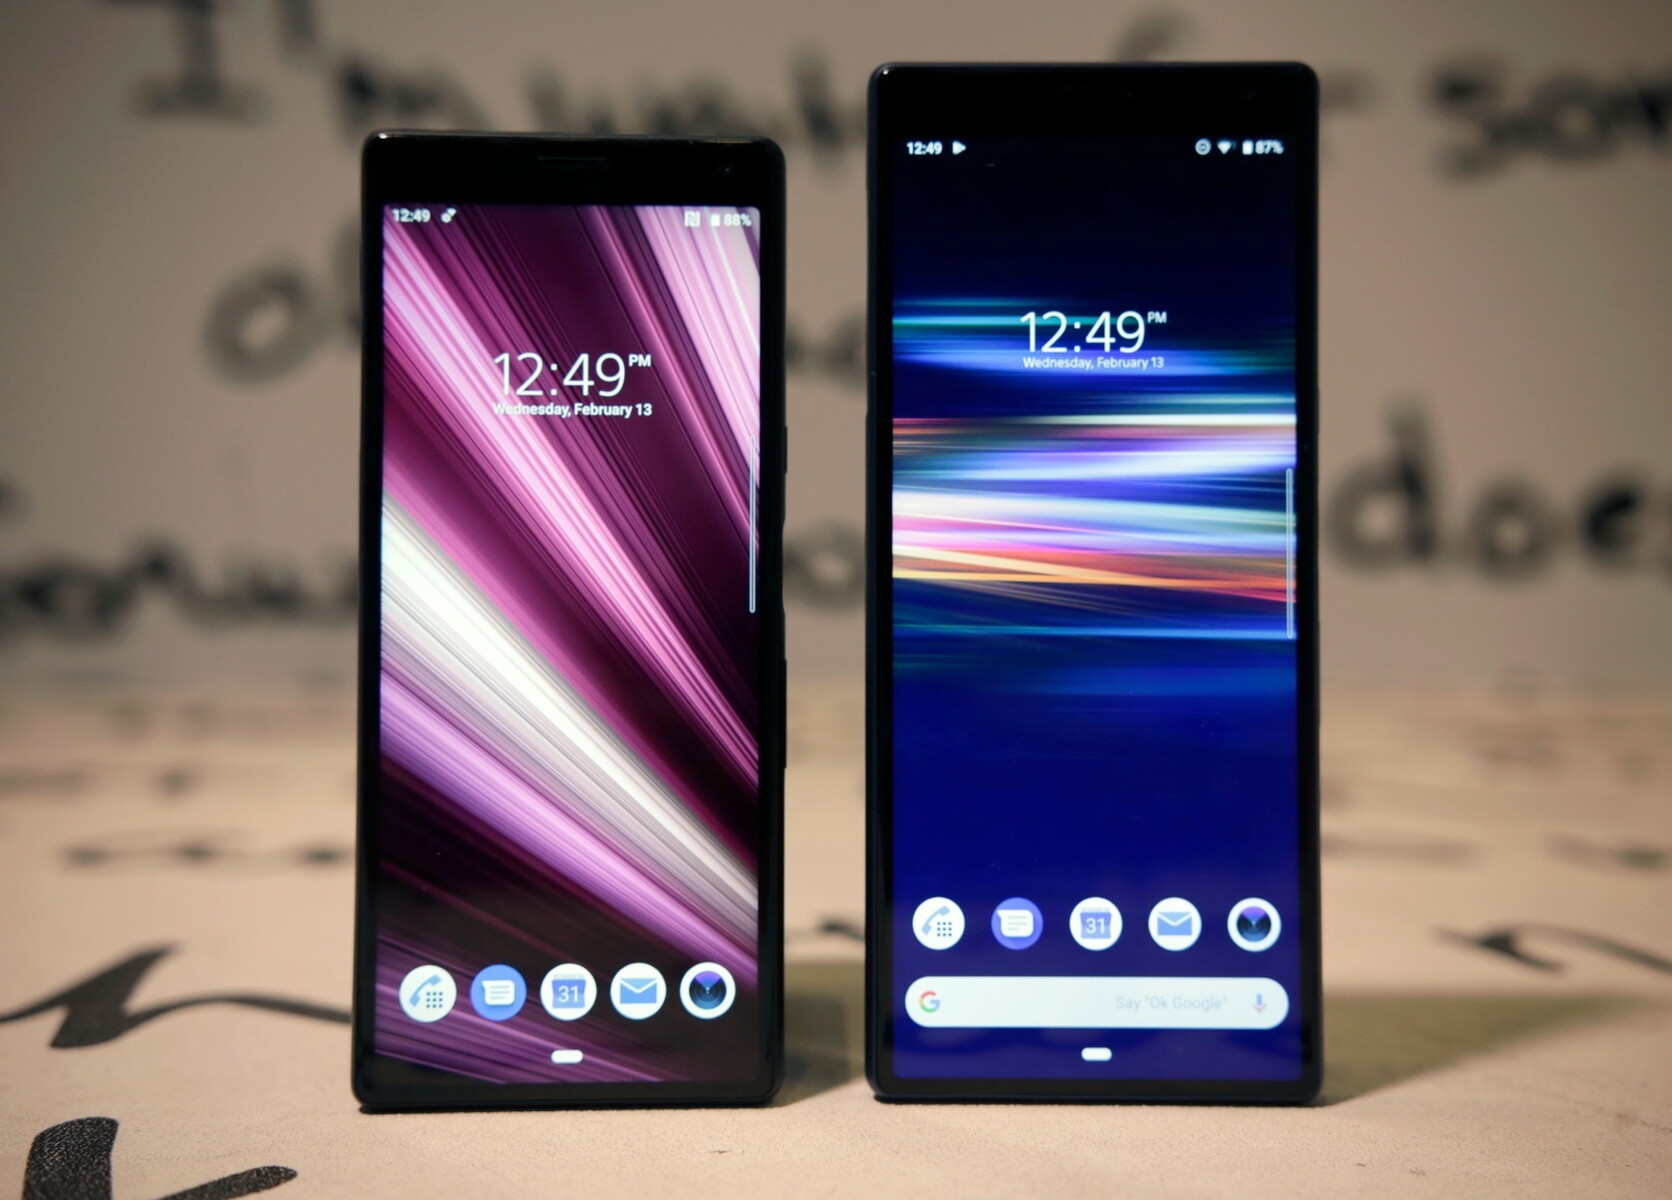 Sony Xperia 1 and Xperia 5 pick up Android 10 updates - NotebookCheck